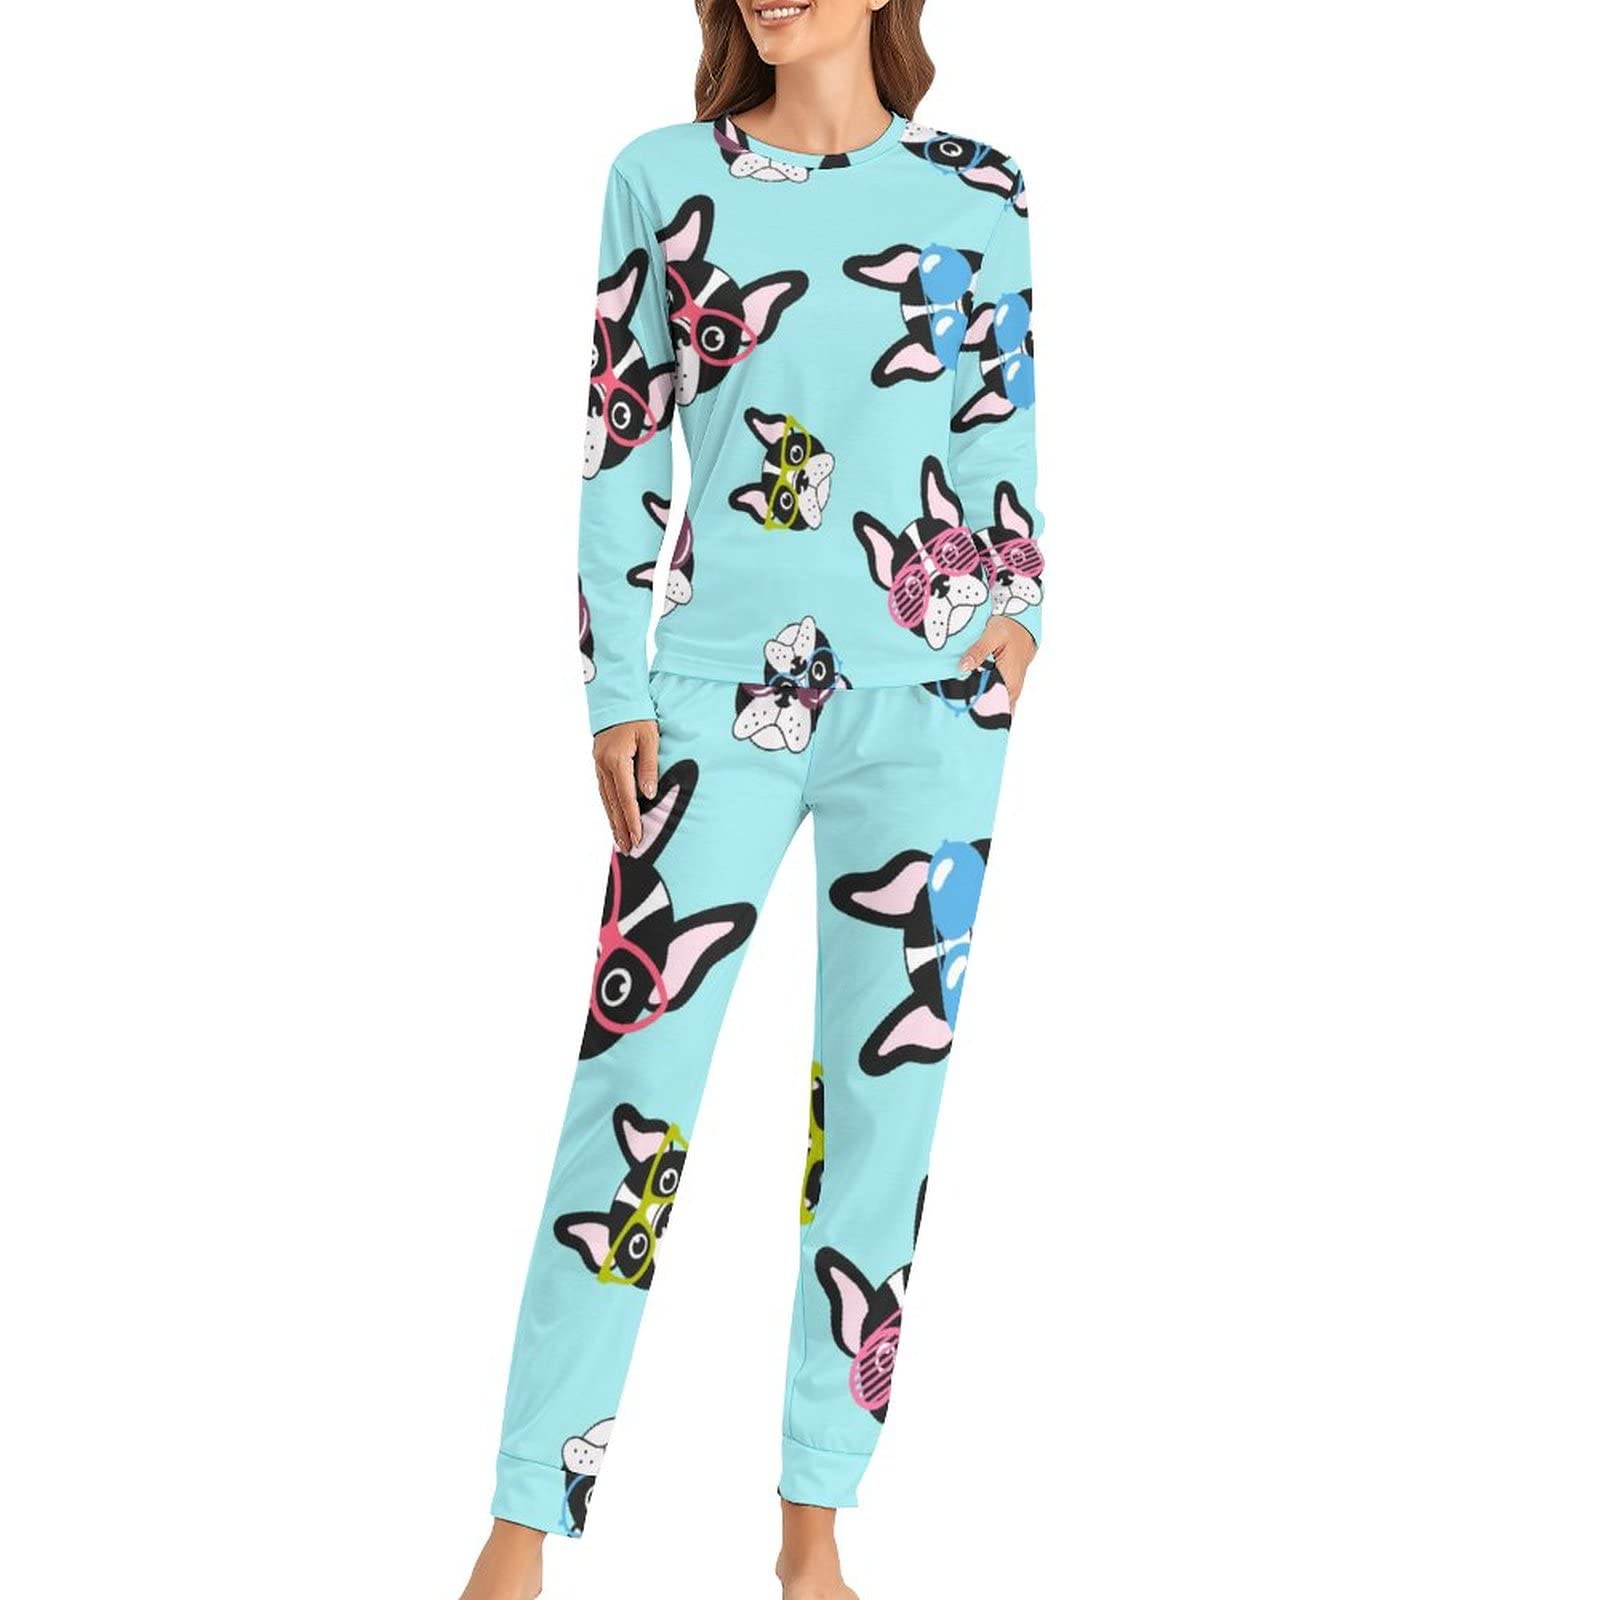 French Bulldogs with Glasses Women's Pajama Sets Two Piece Long